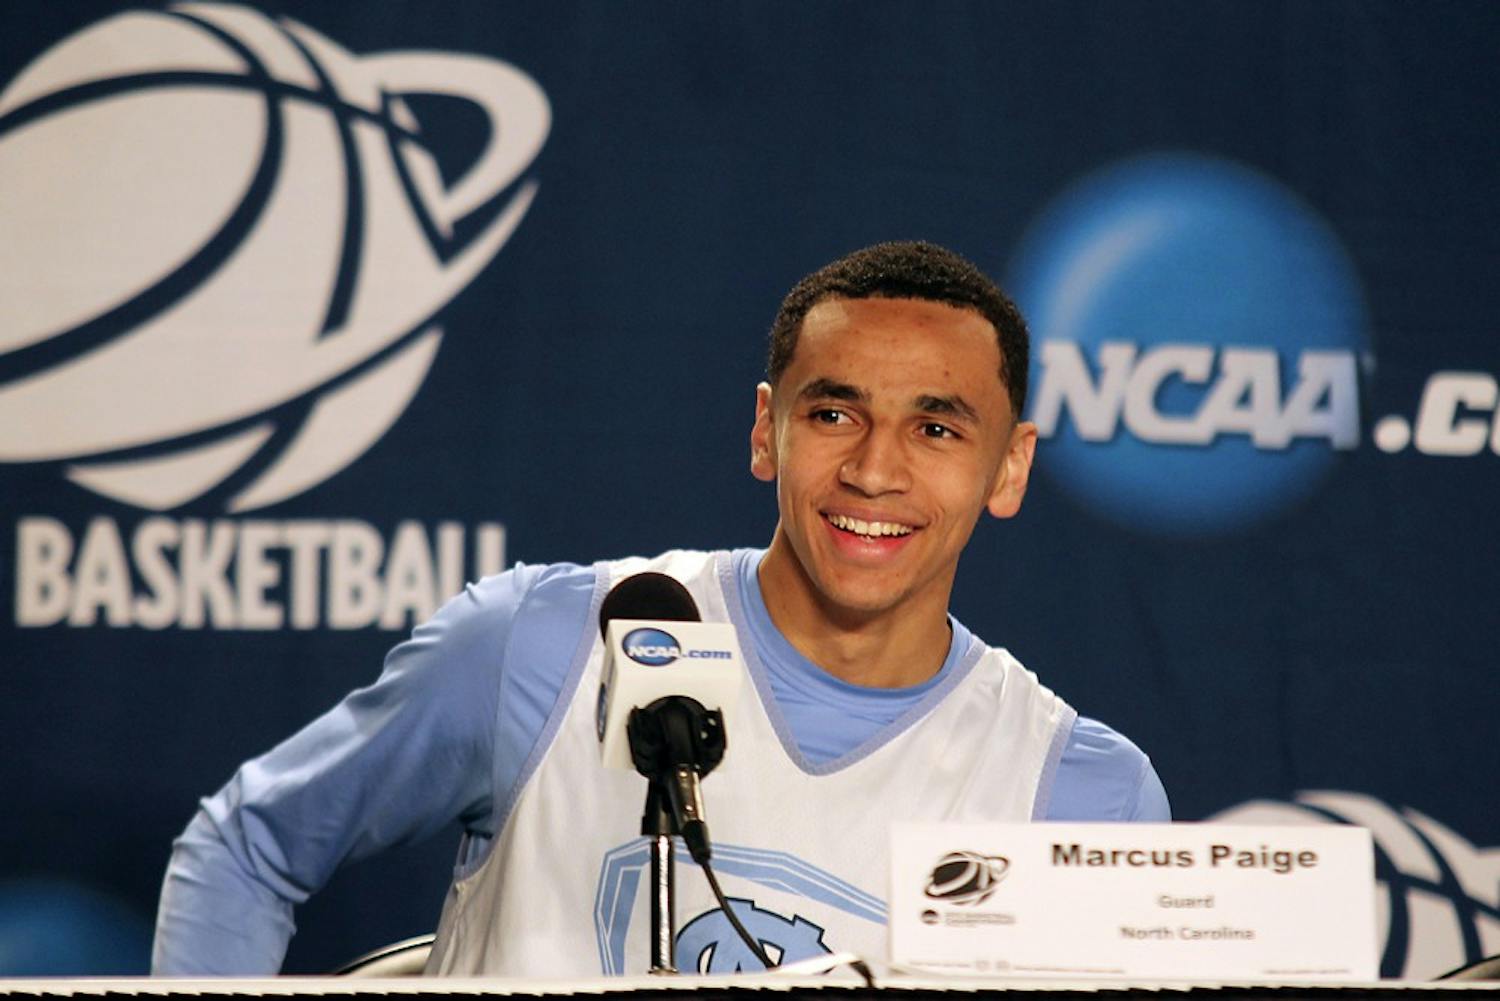 Marcus Paige will help the Tar Heels take on the Harvard Crimson in Jacksonville, Fla., at 7:20 p.m.